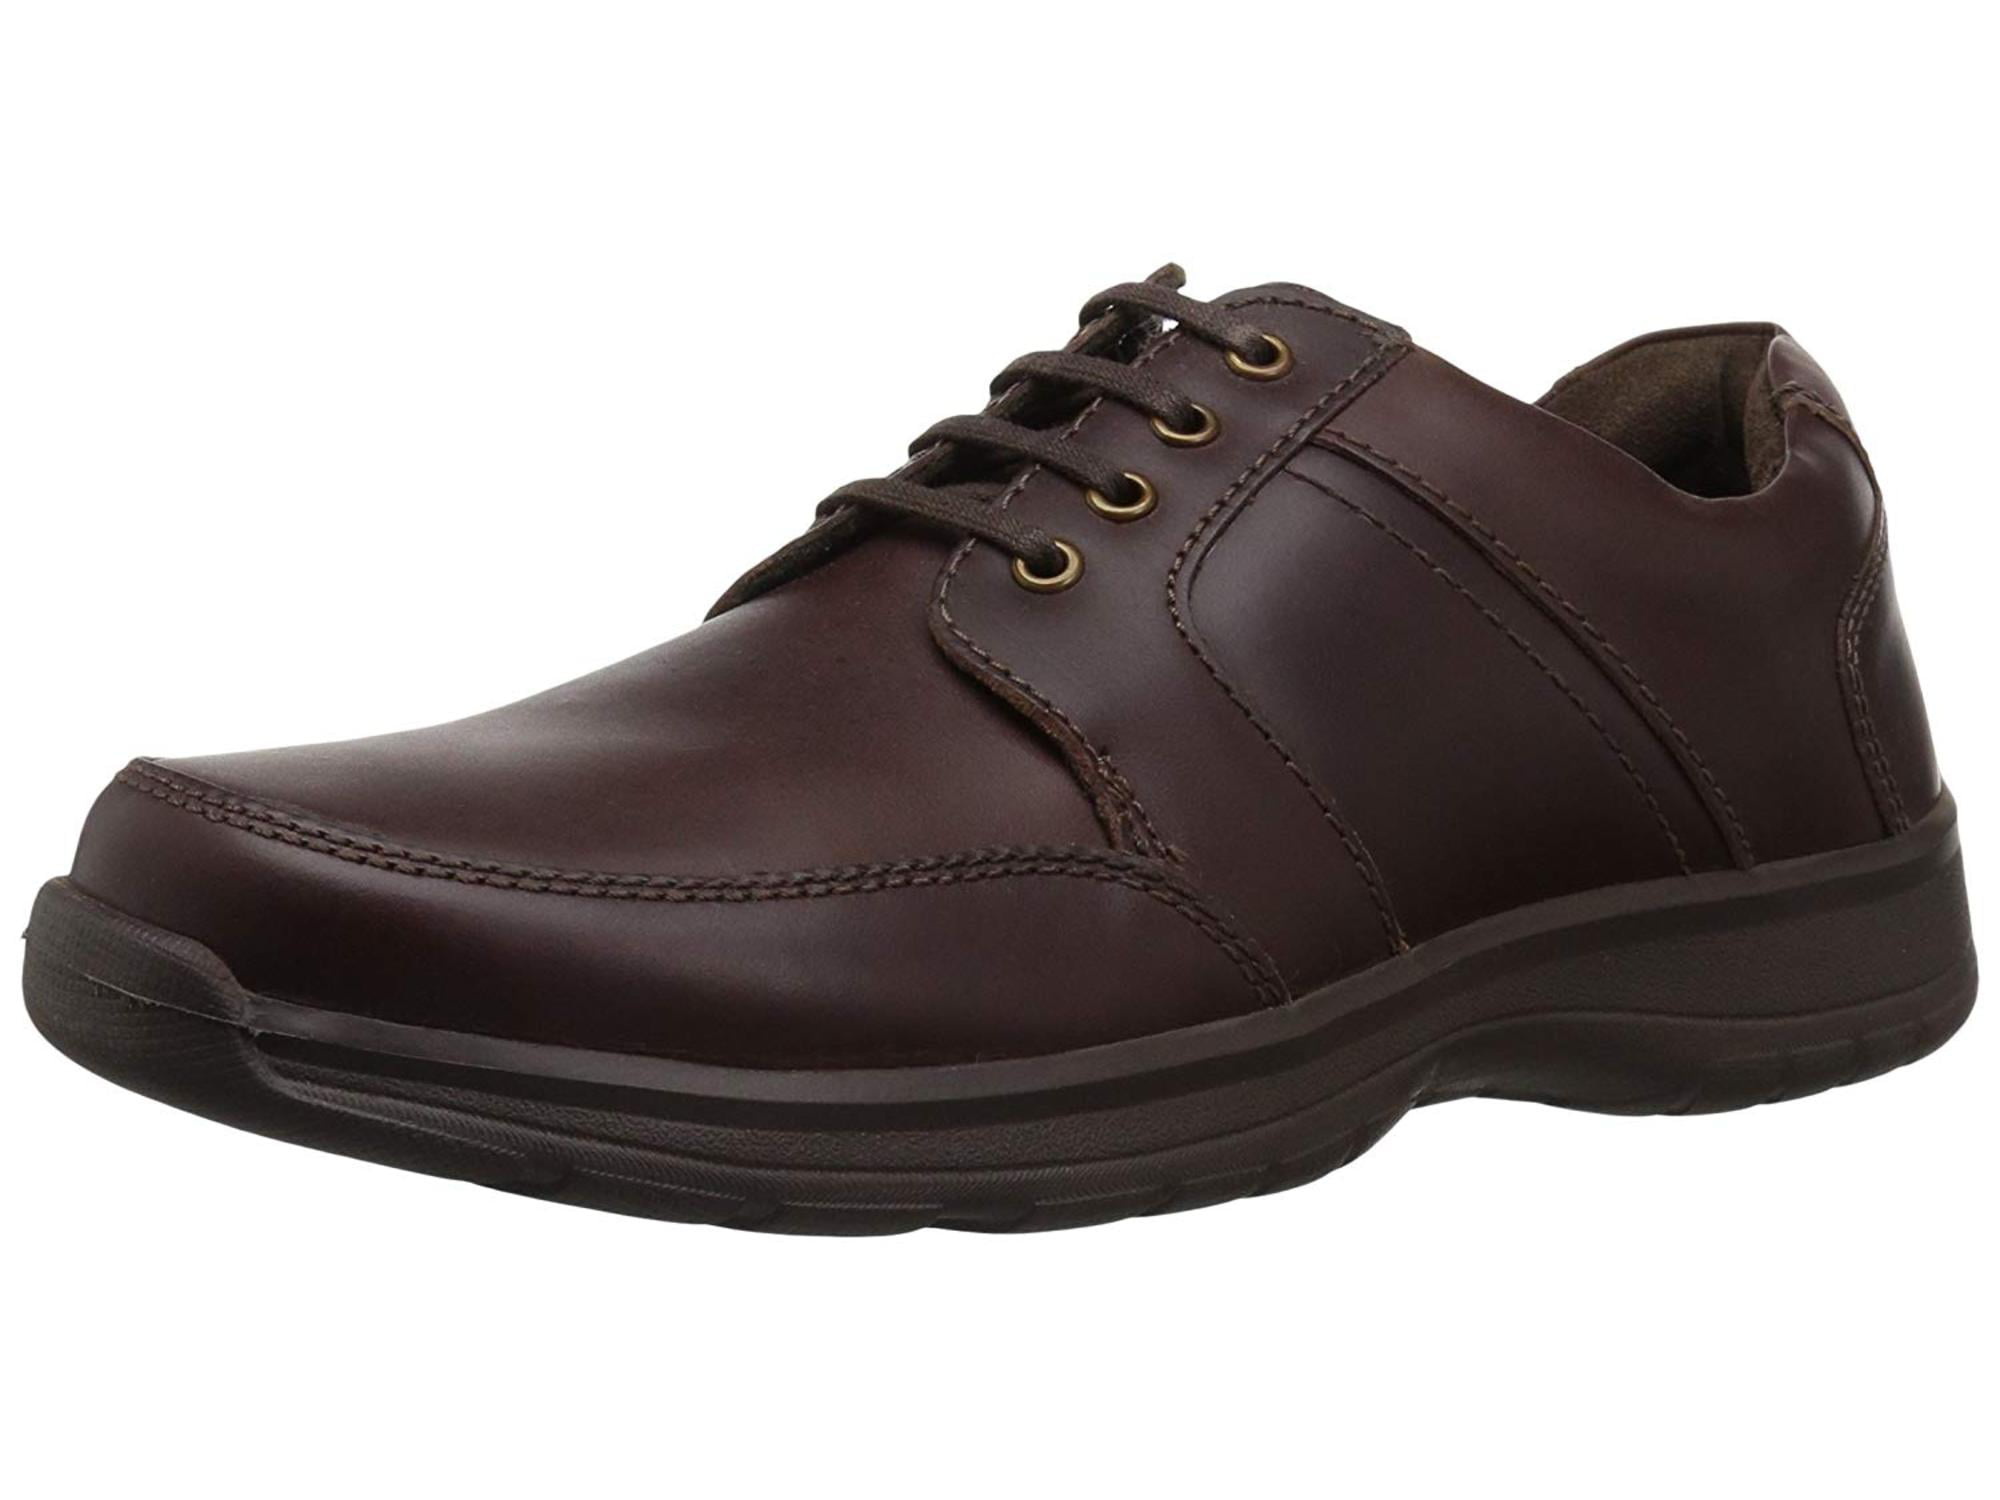 Hush Puppies Mens Henson Leather Lace Up Casual Oxfords - Walmart.com